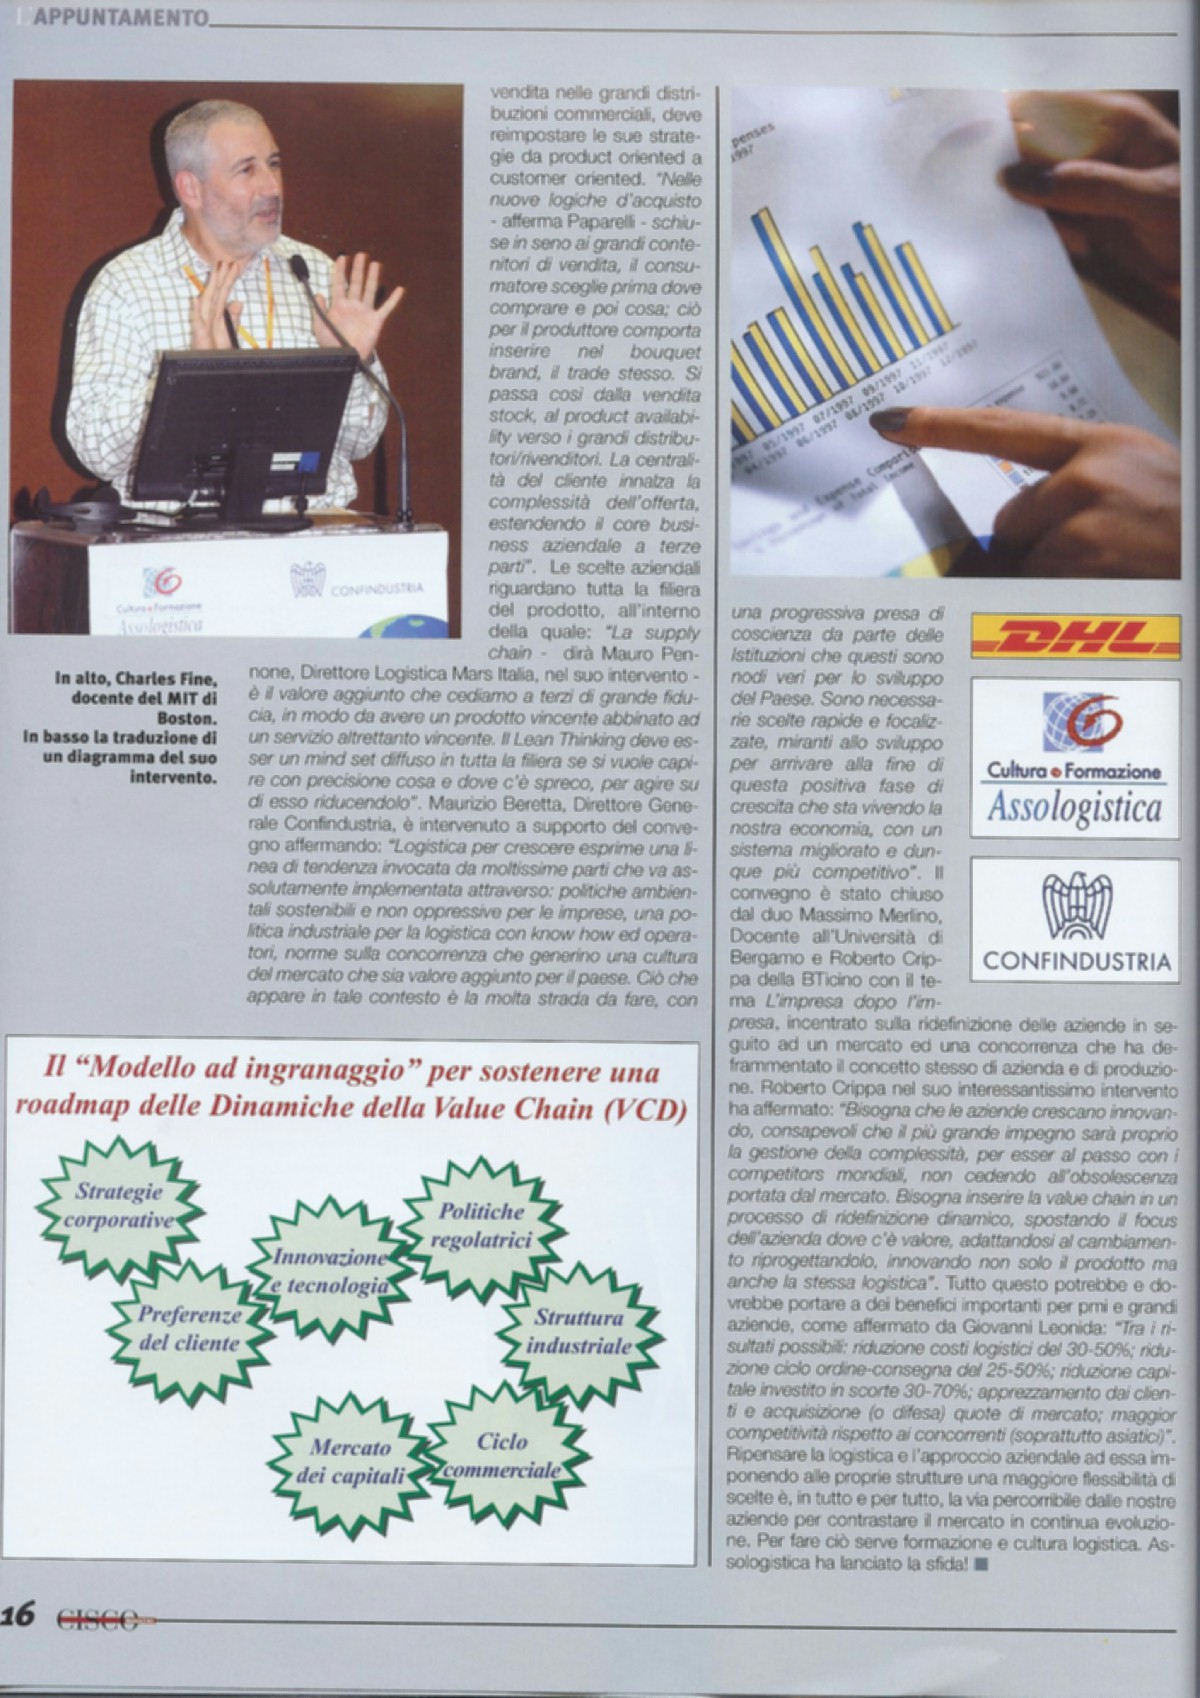 September 9th, 2007, CISCO Magazine - Flexibility in Company Decision Making? - Part 3